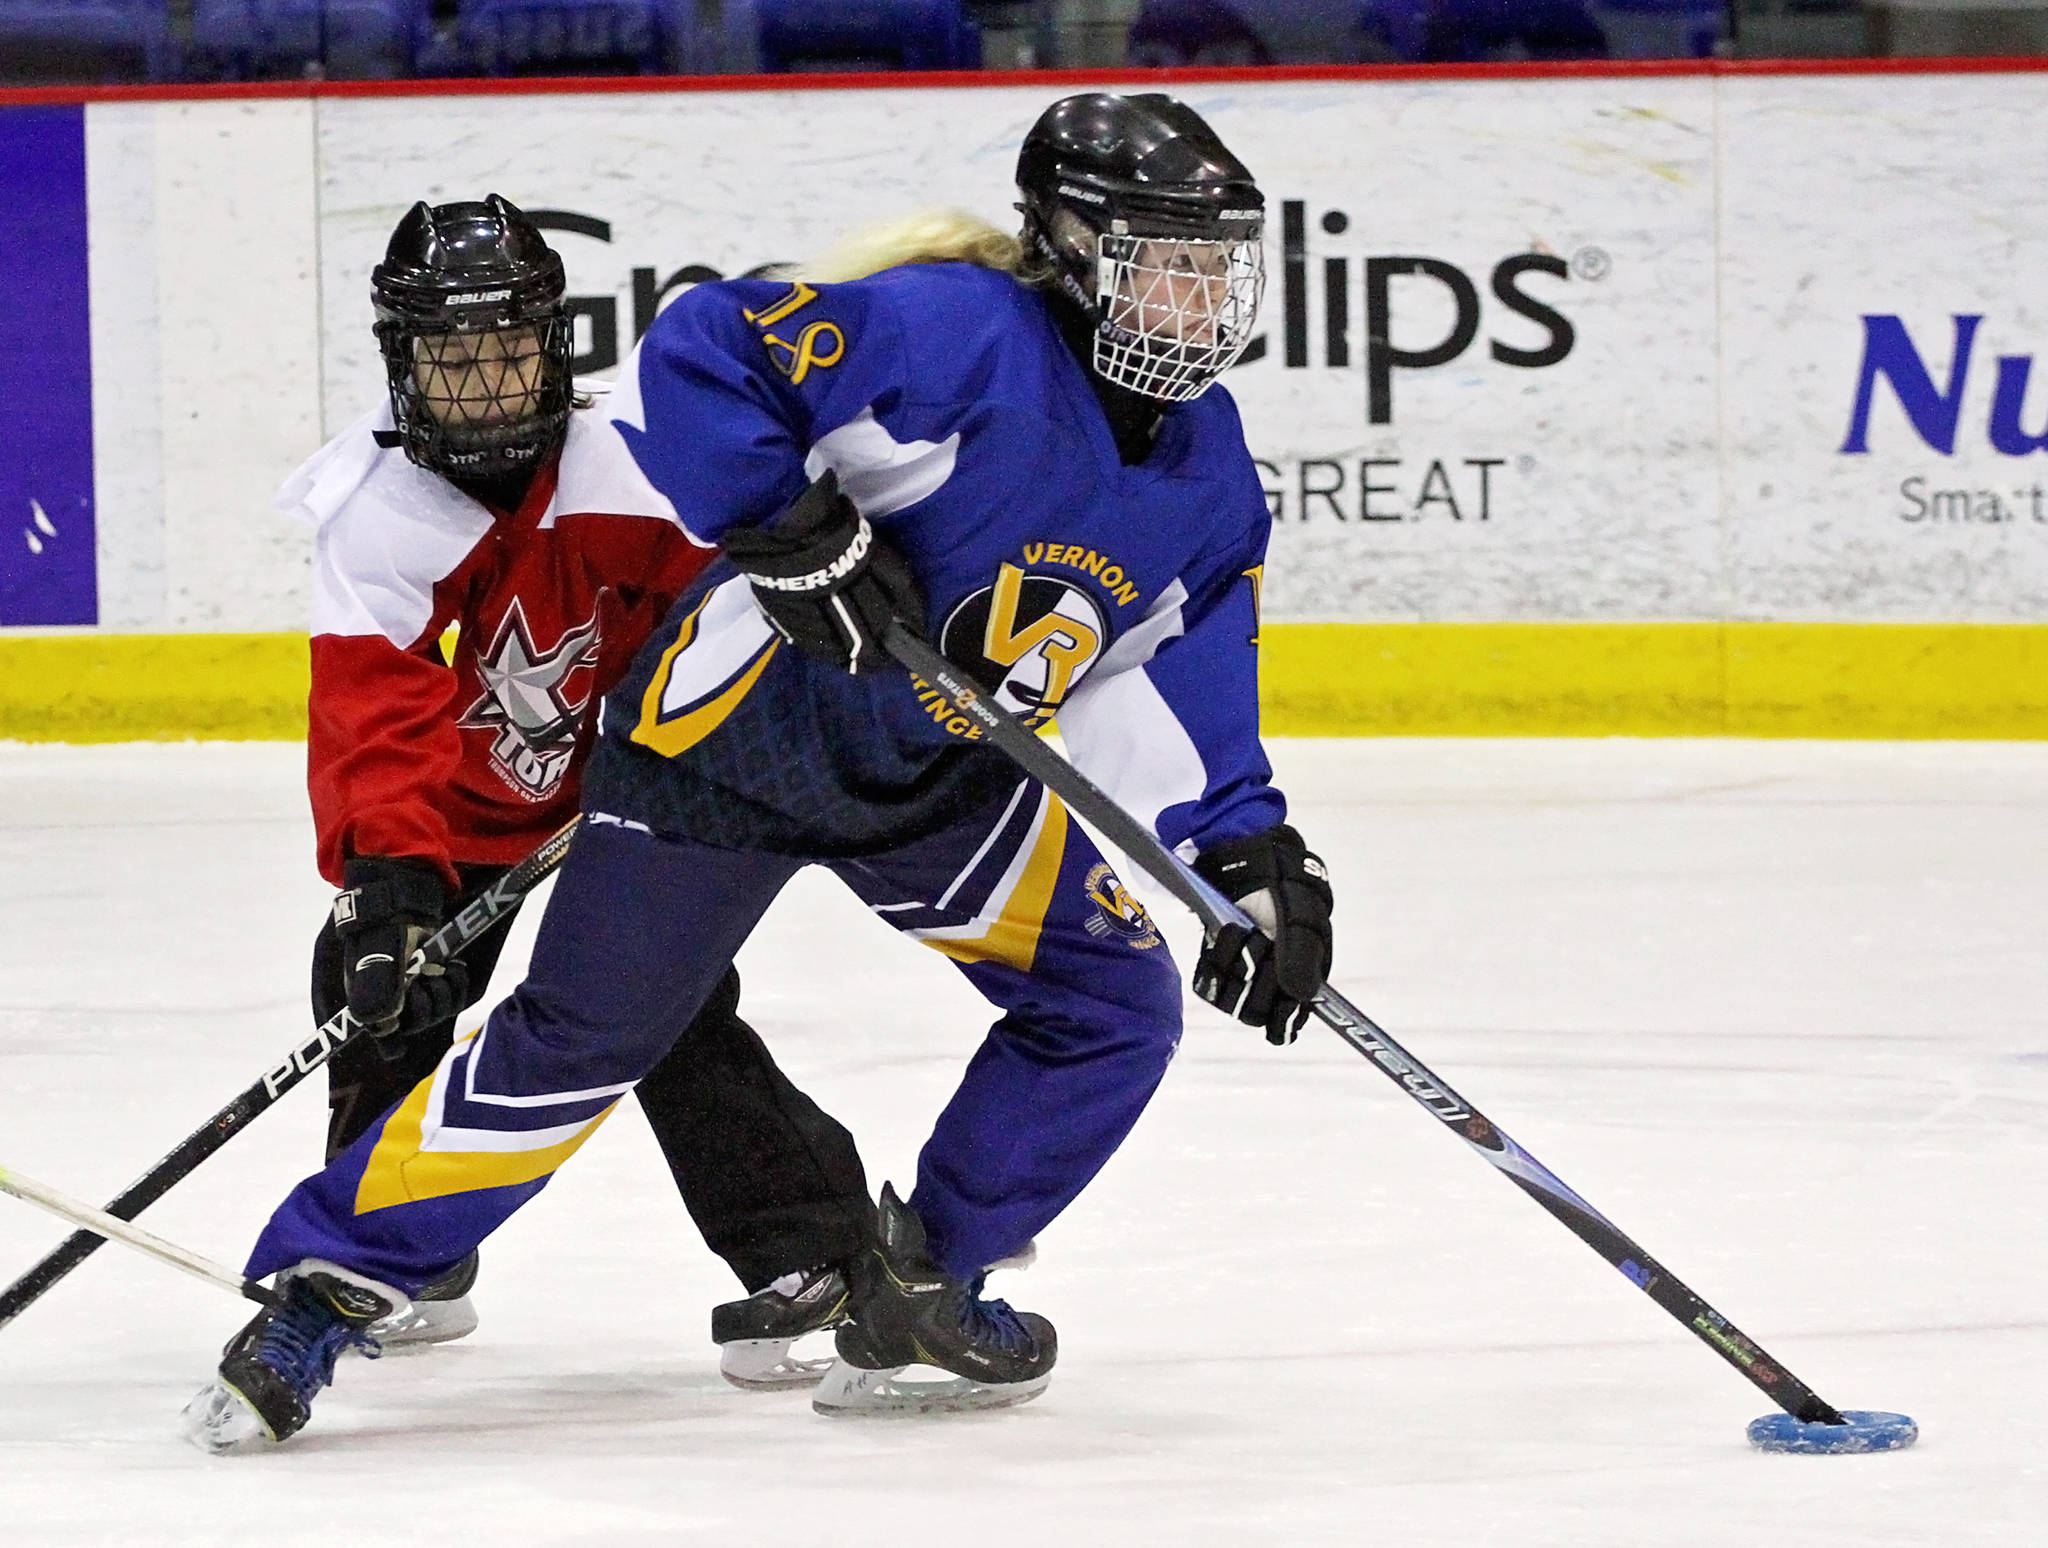 The Greater Vernon Ringette Association is one of six Vernon sports groups benefitting from B.C.’s Local Sport Relief Fund. (Morning Star file photo)